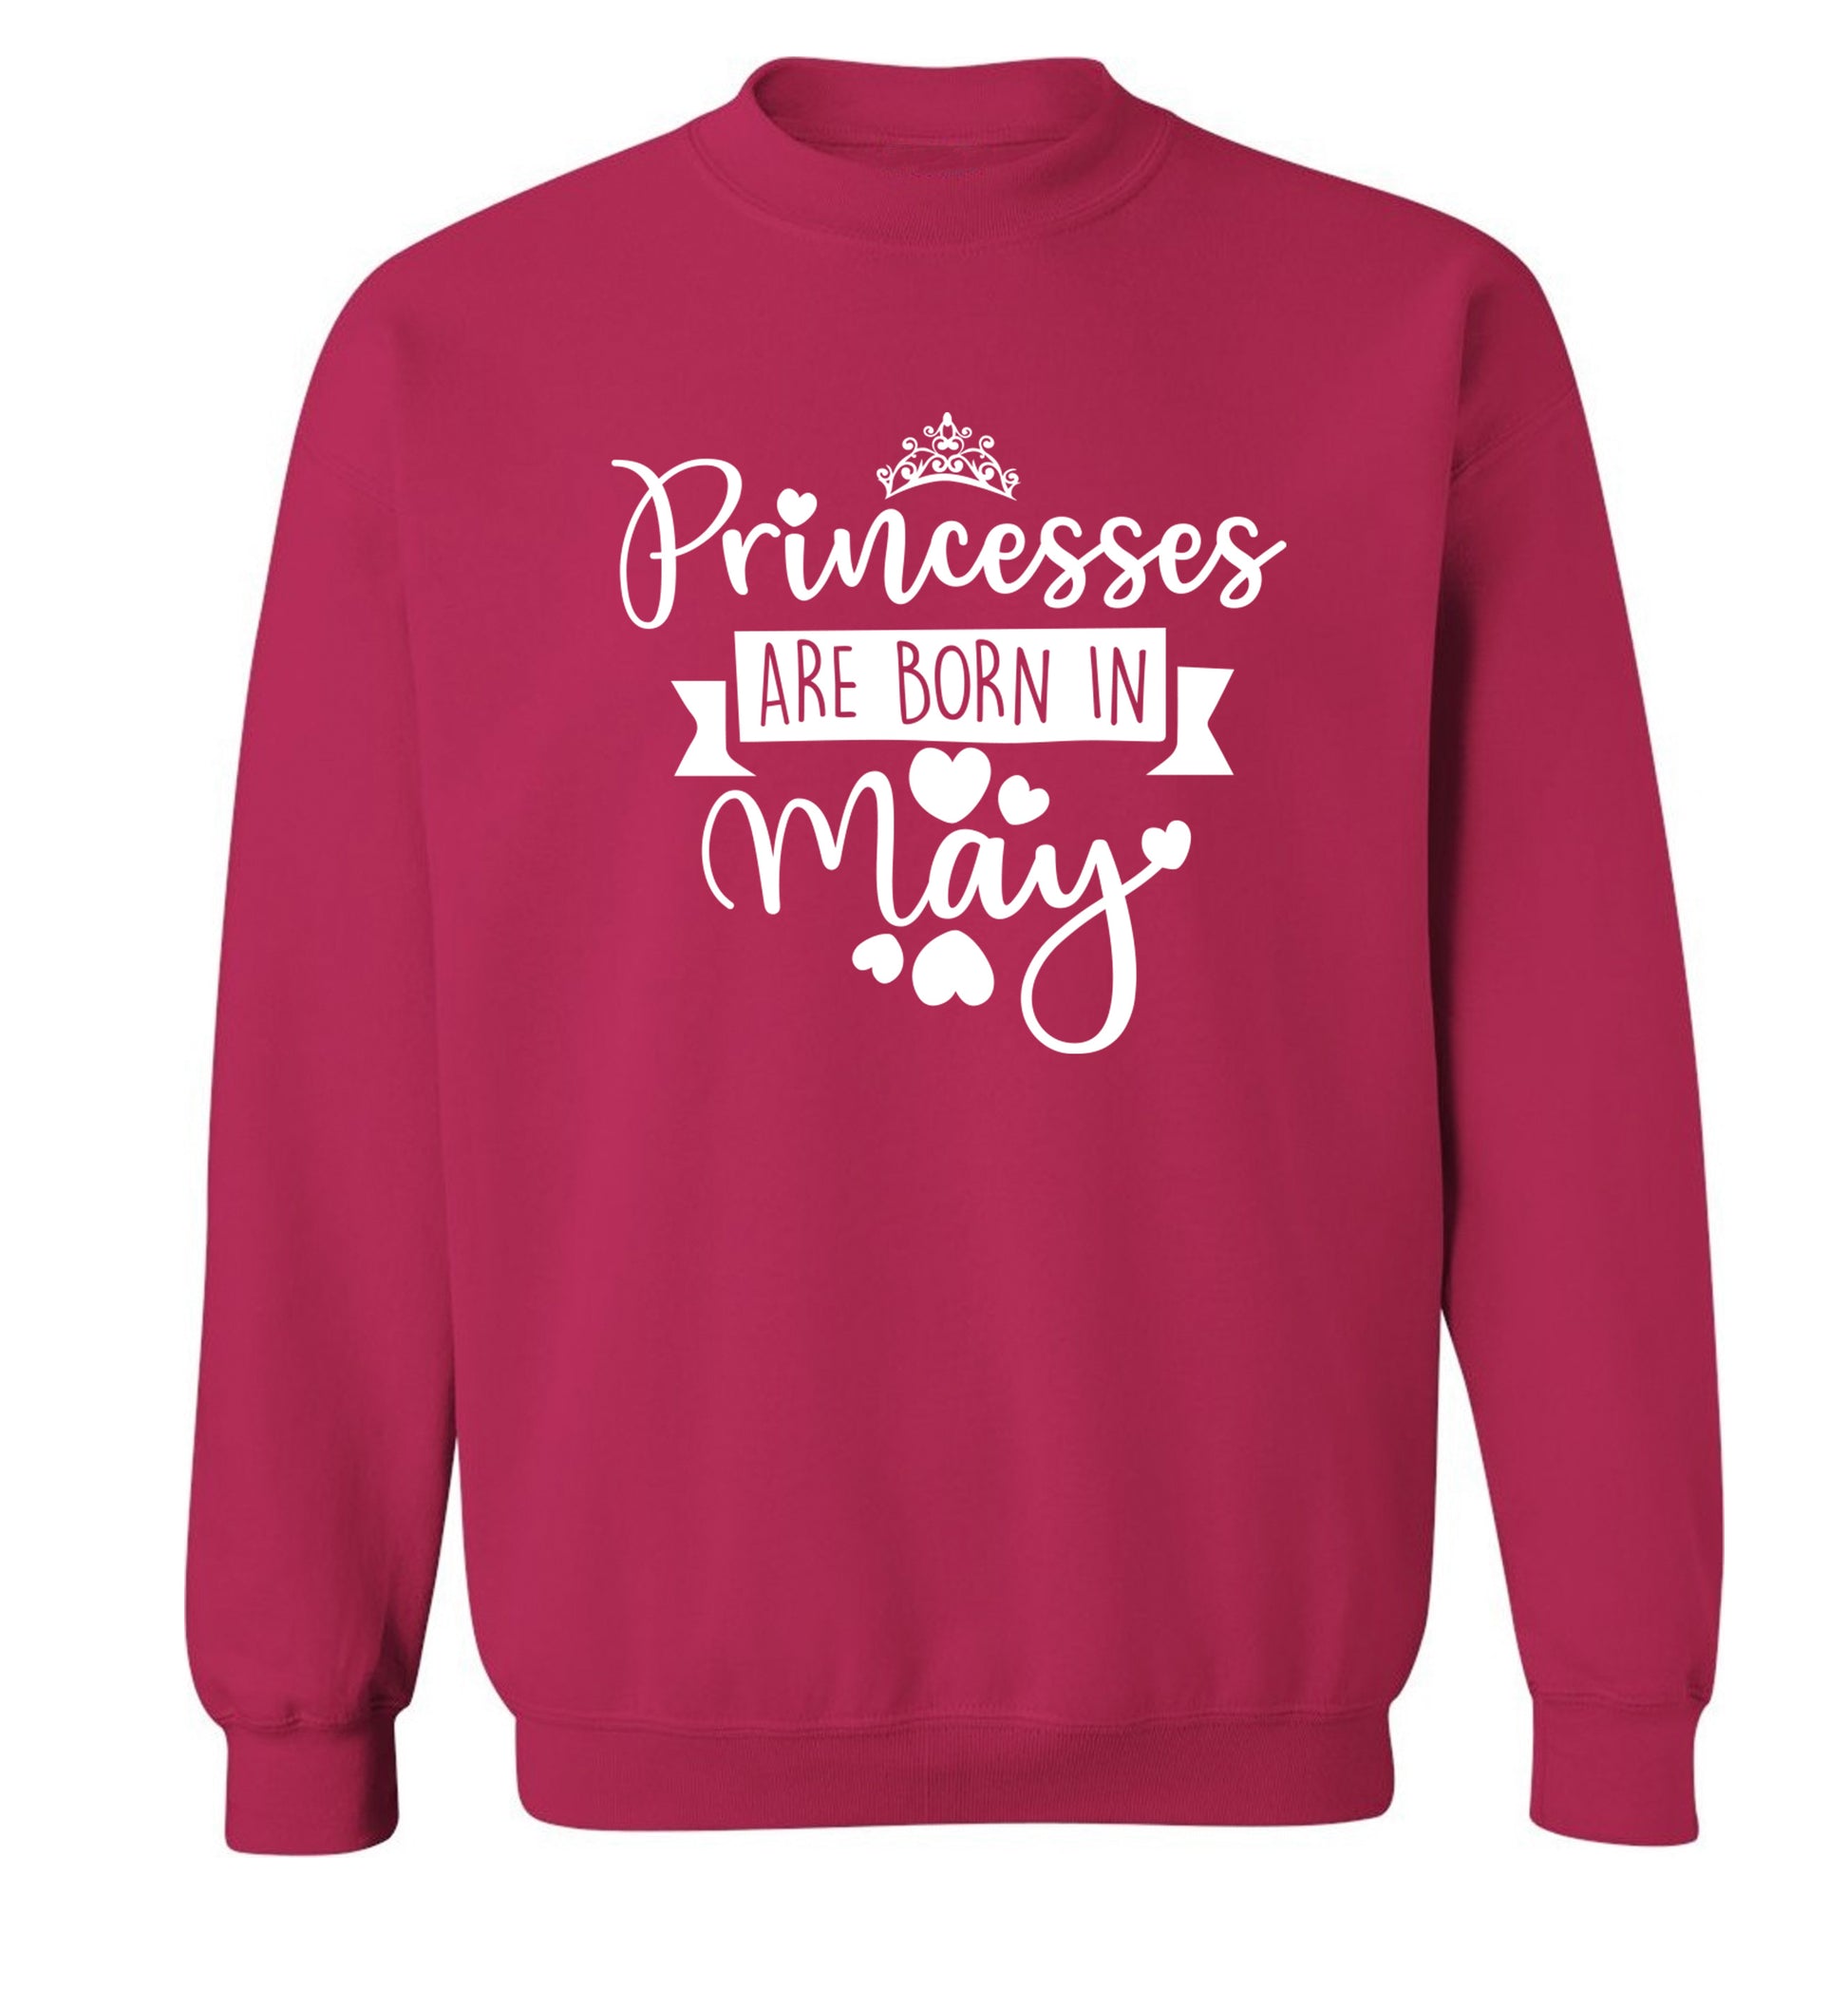 Princesses are born in May Adult's unisex pink Sweater 2XL